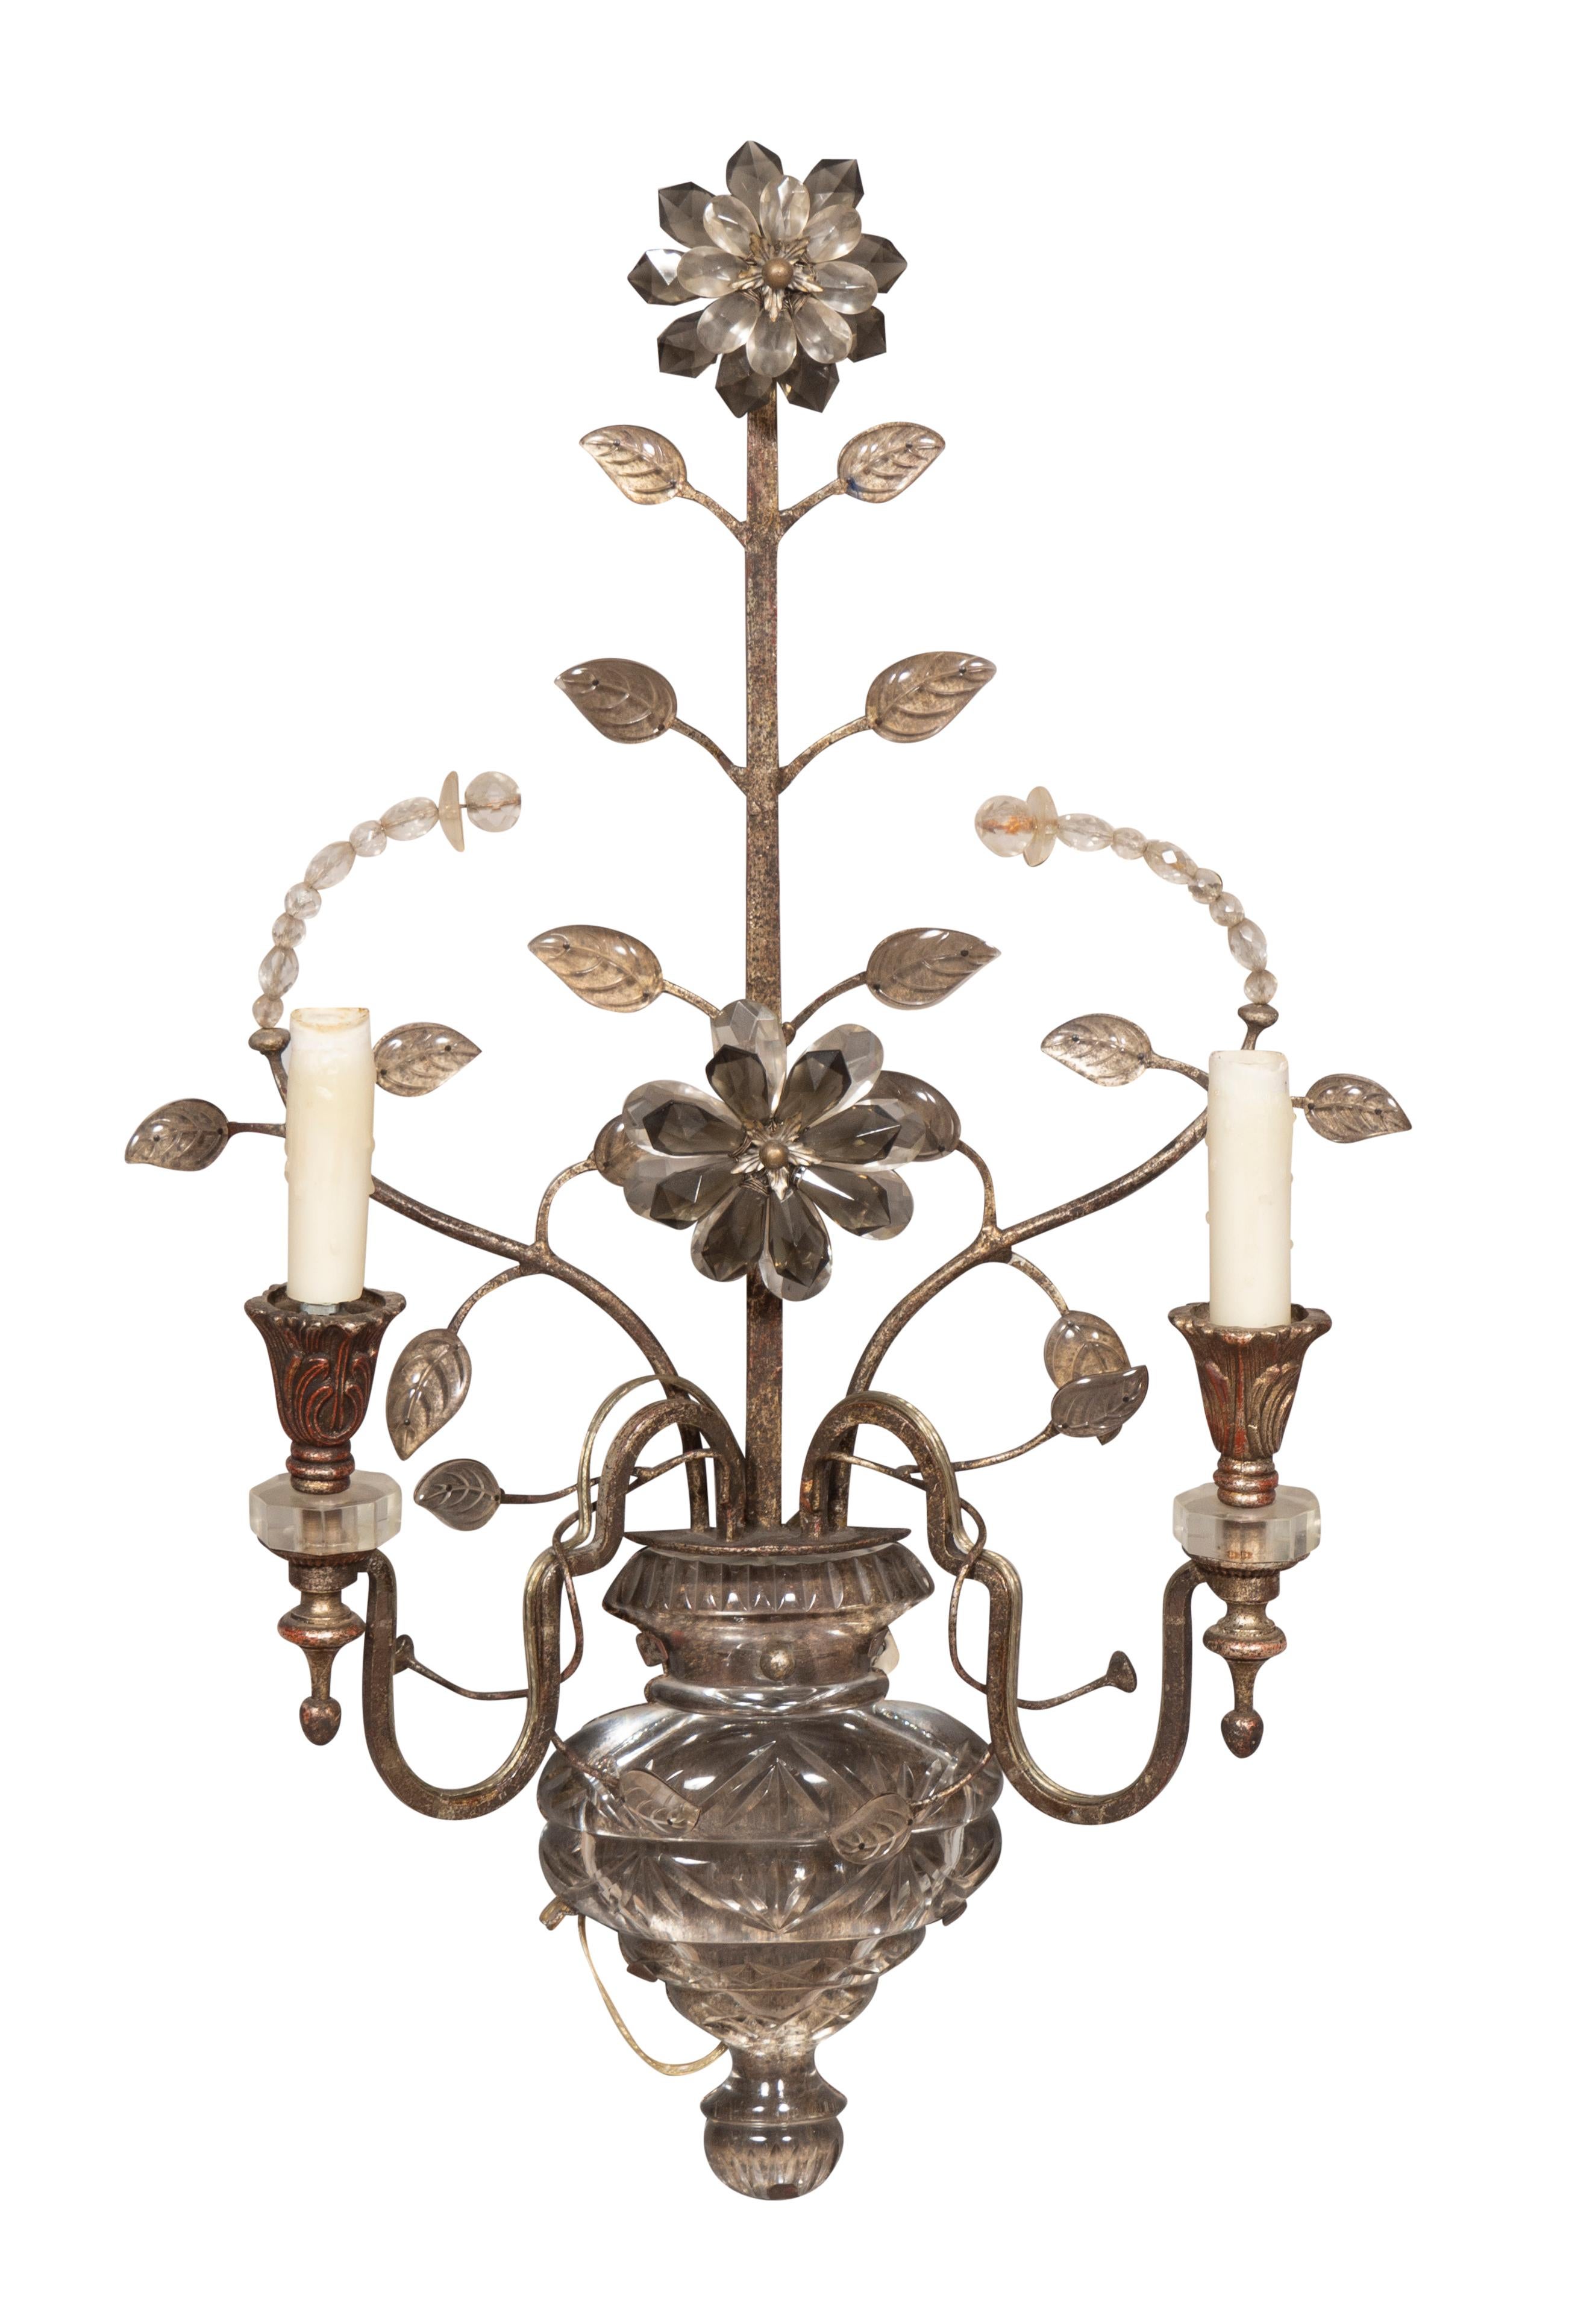 Vintage made in Florence with silvered iron and cut glass drops either clear or gray with central flower and leaves in the Bagues style. Two arms all seated in a glass vase.